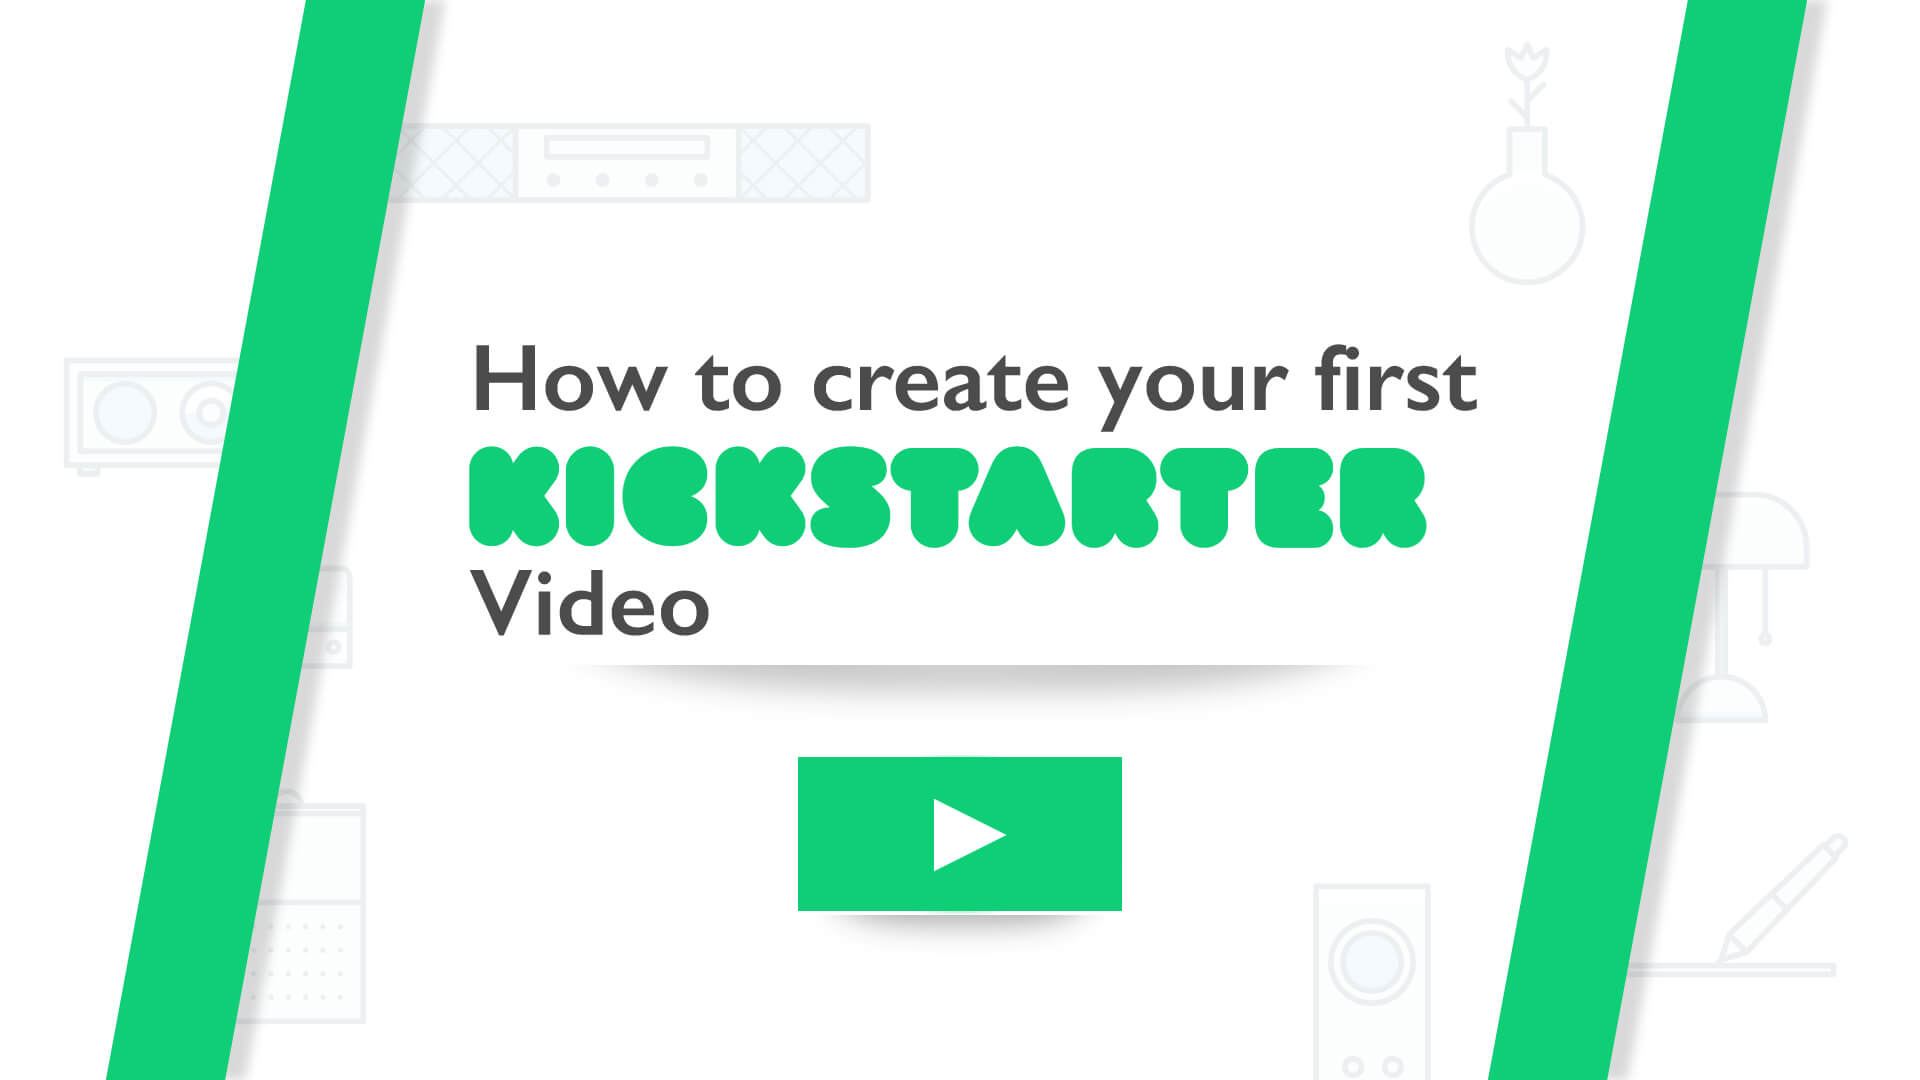 How to create your first Kickstarter video